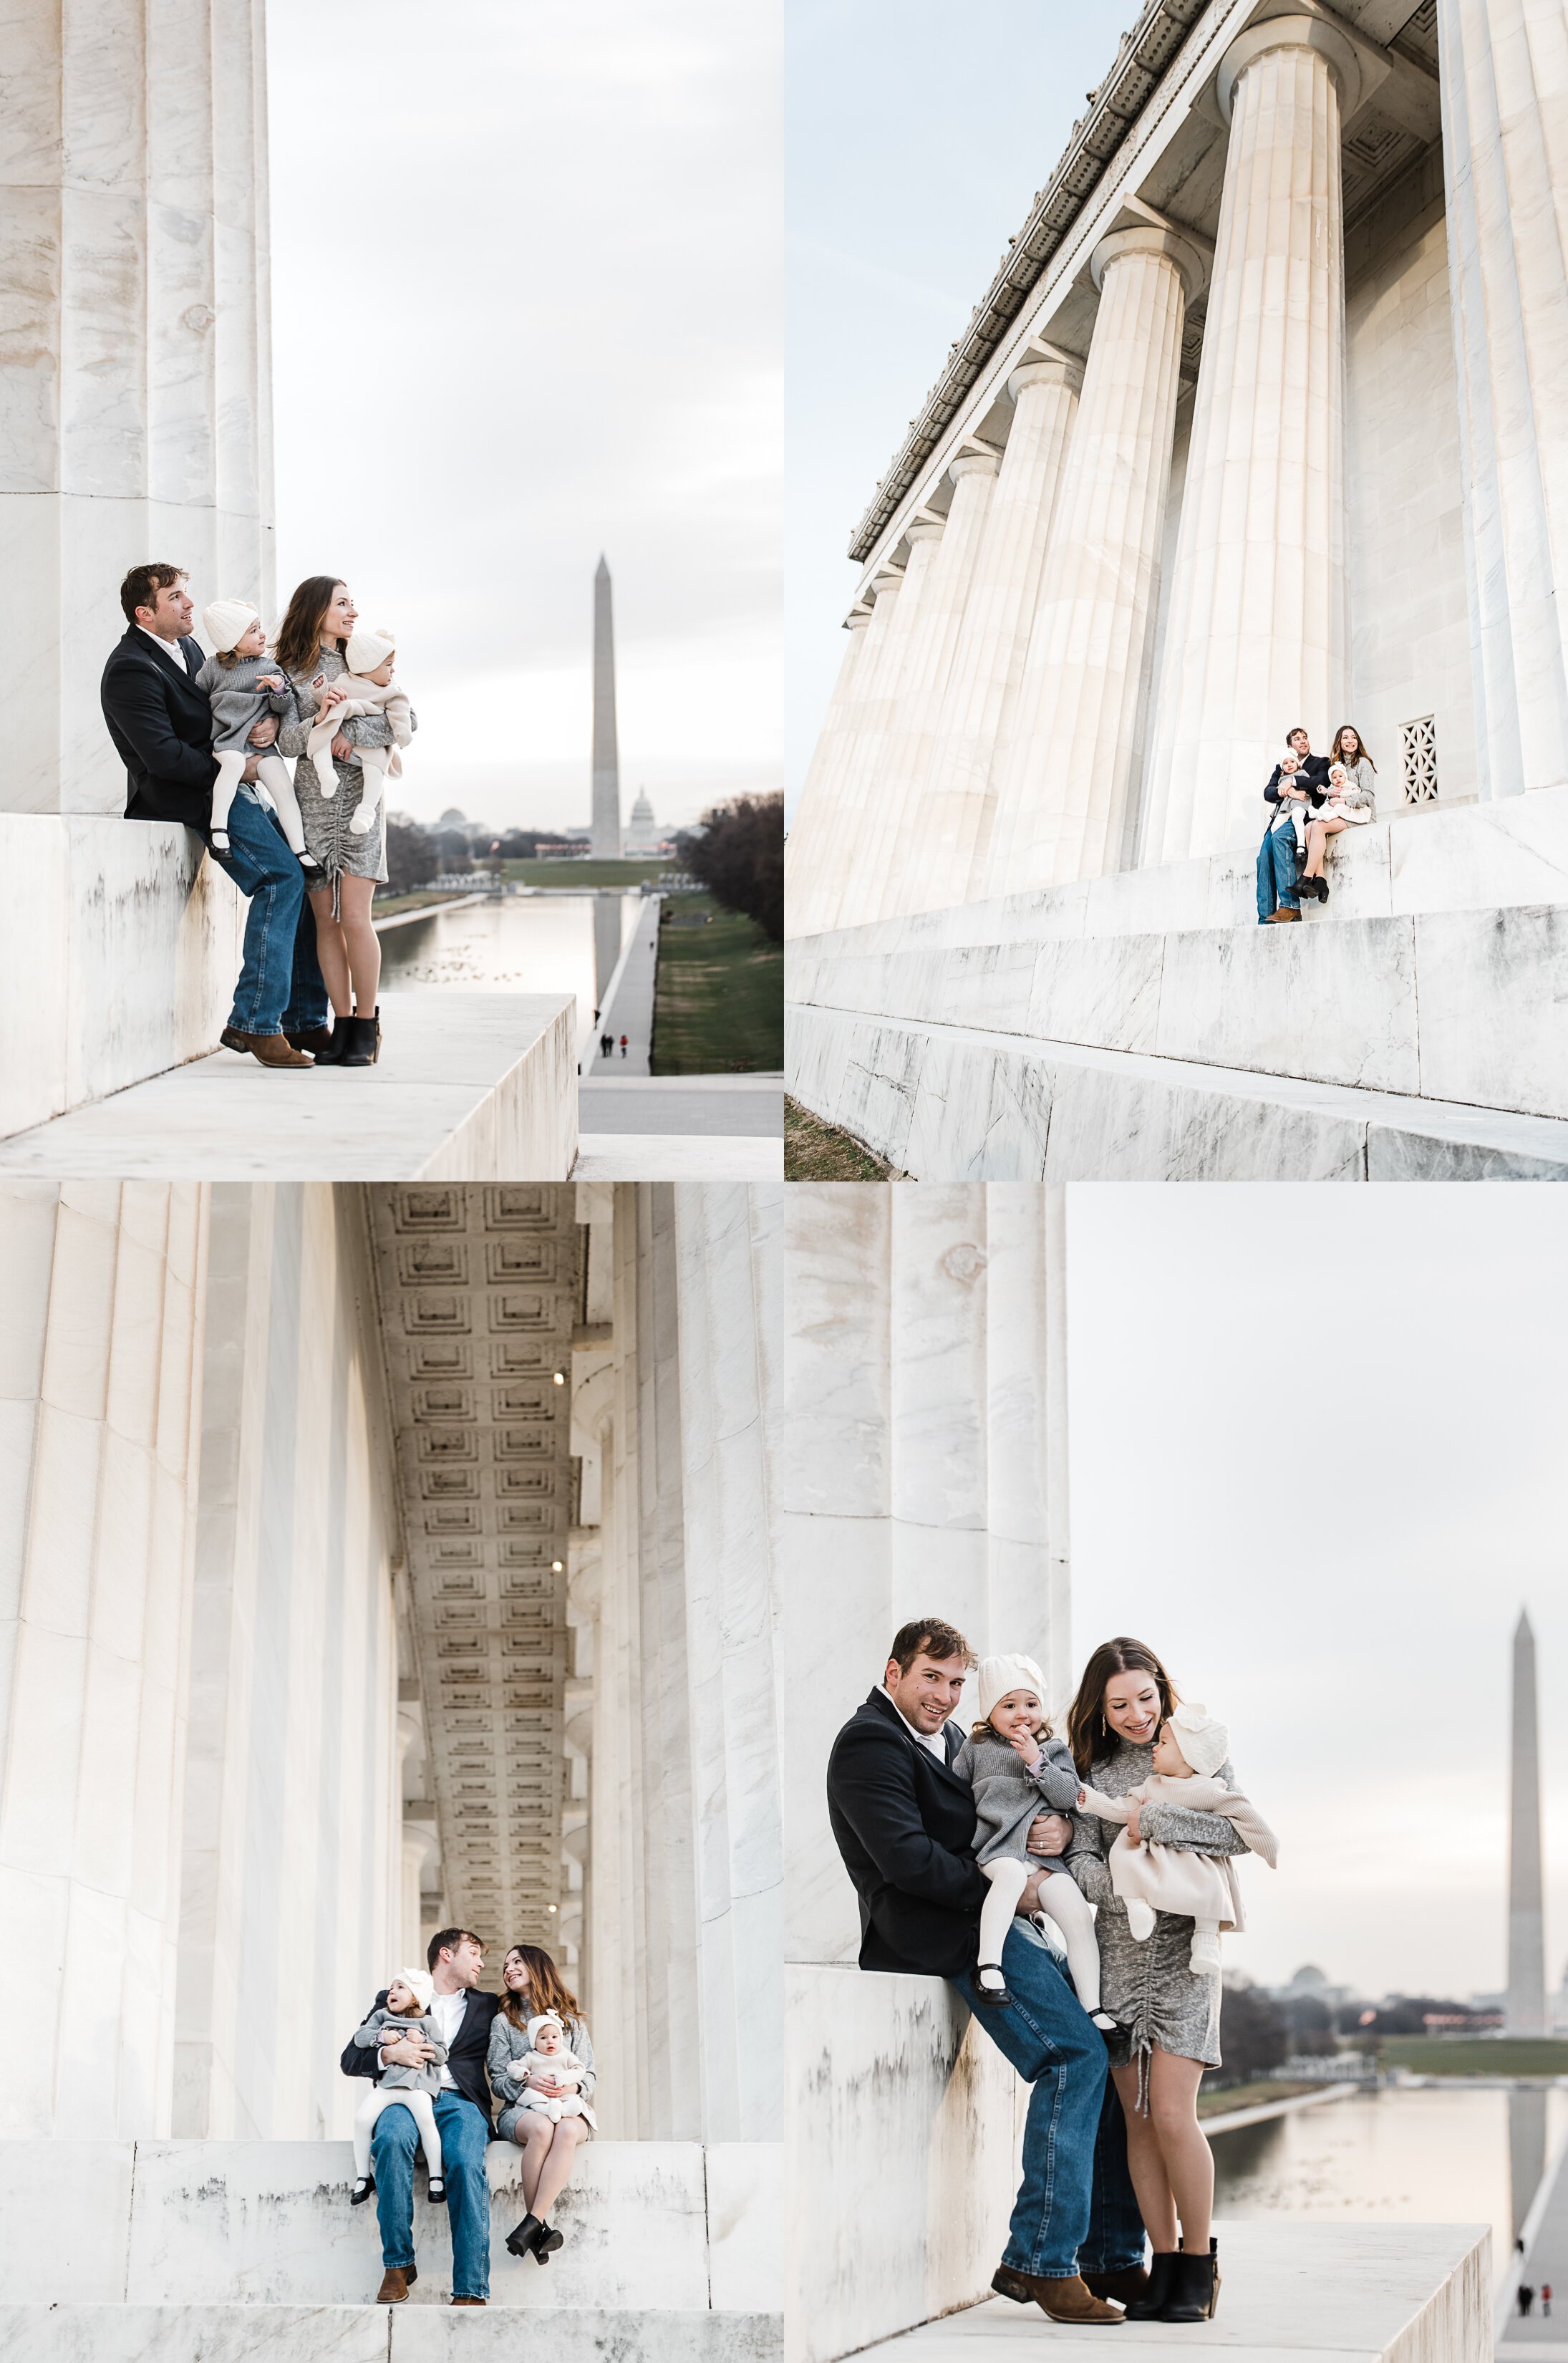 Family photoshoot at the National Mall